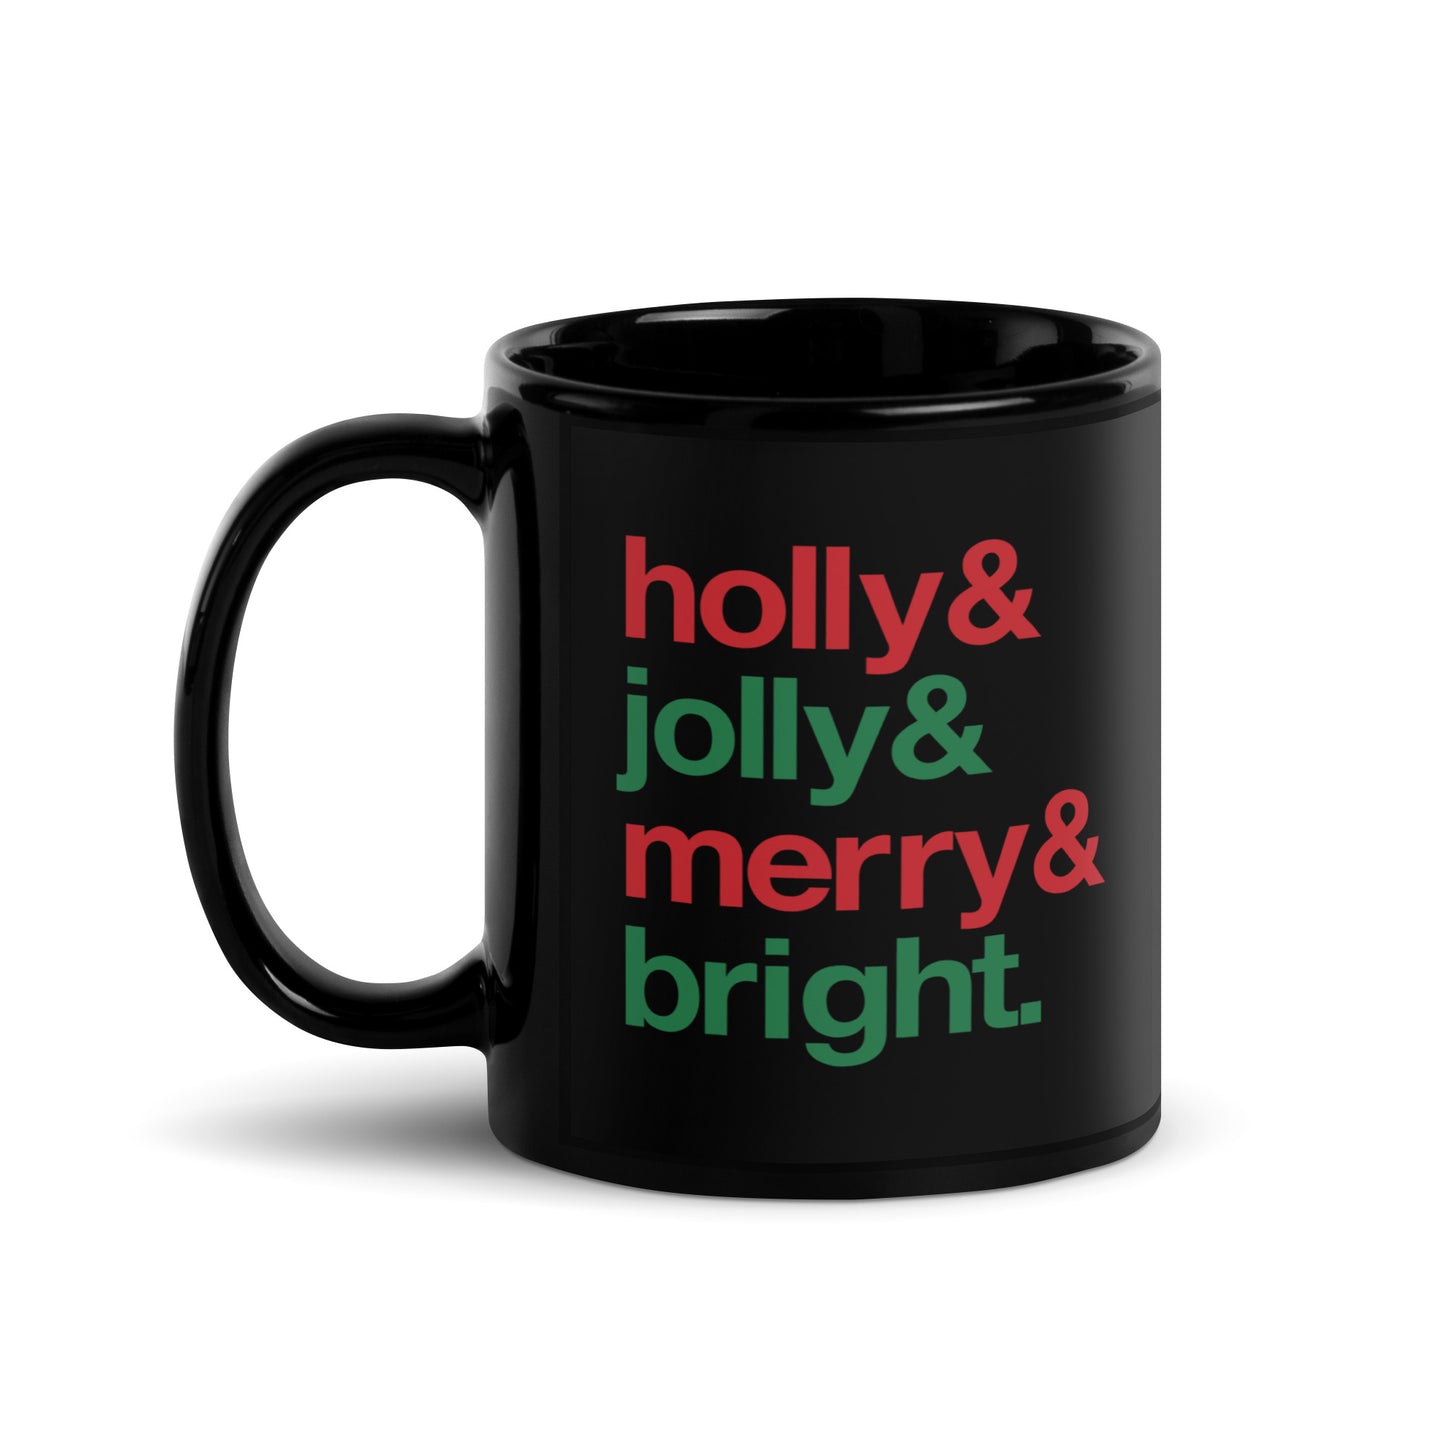 A black 11 ounce ceramic mug with four lines of red and green text that read "Holly & Jolly & Merry & Bright"